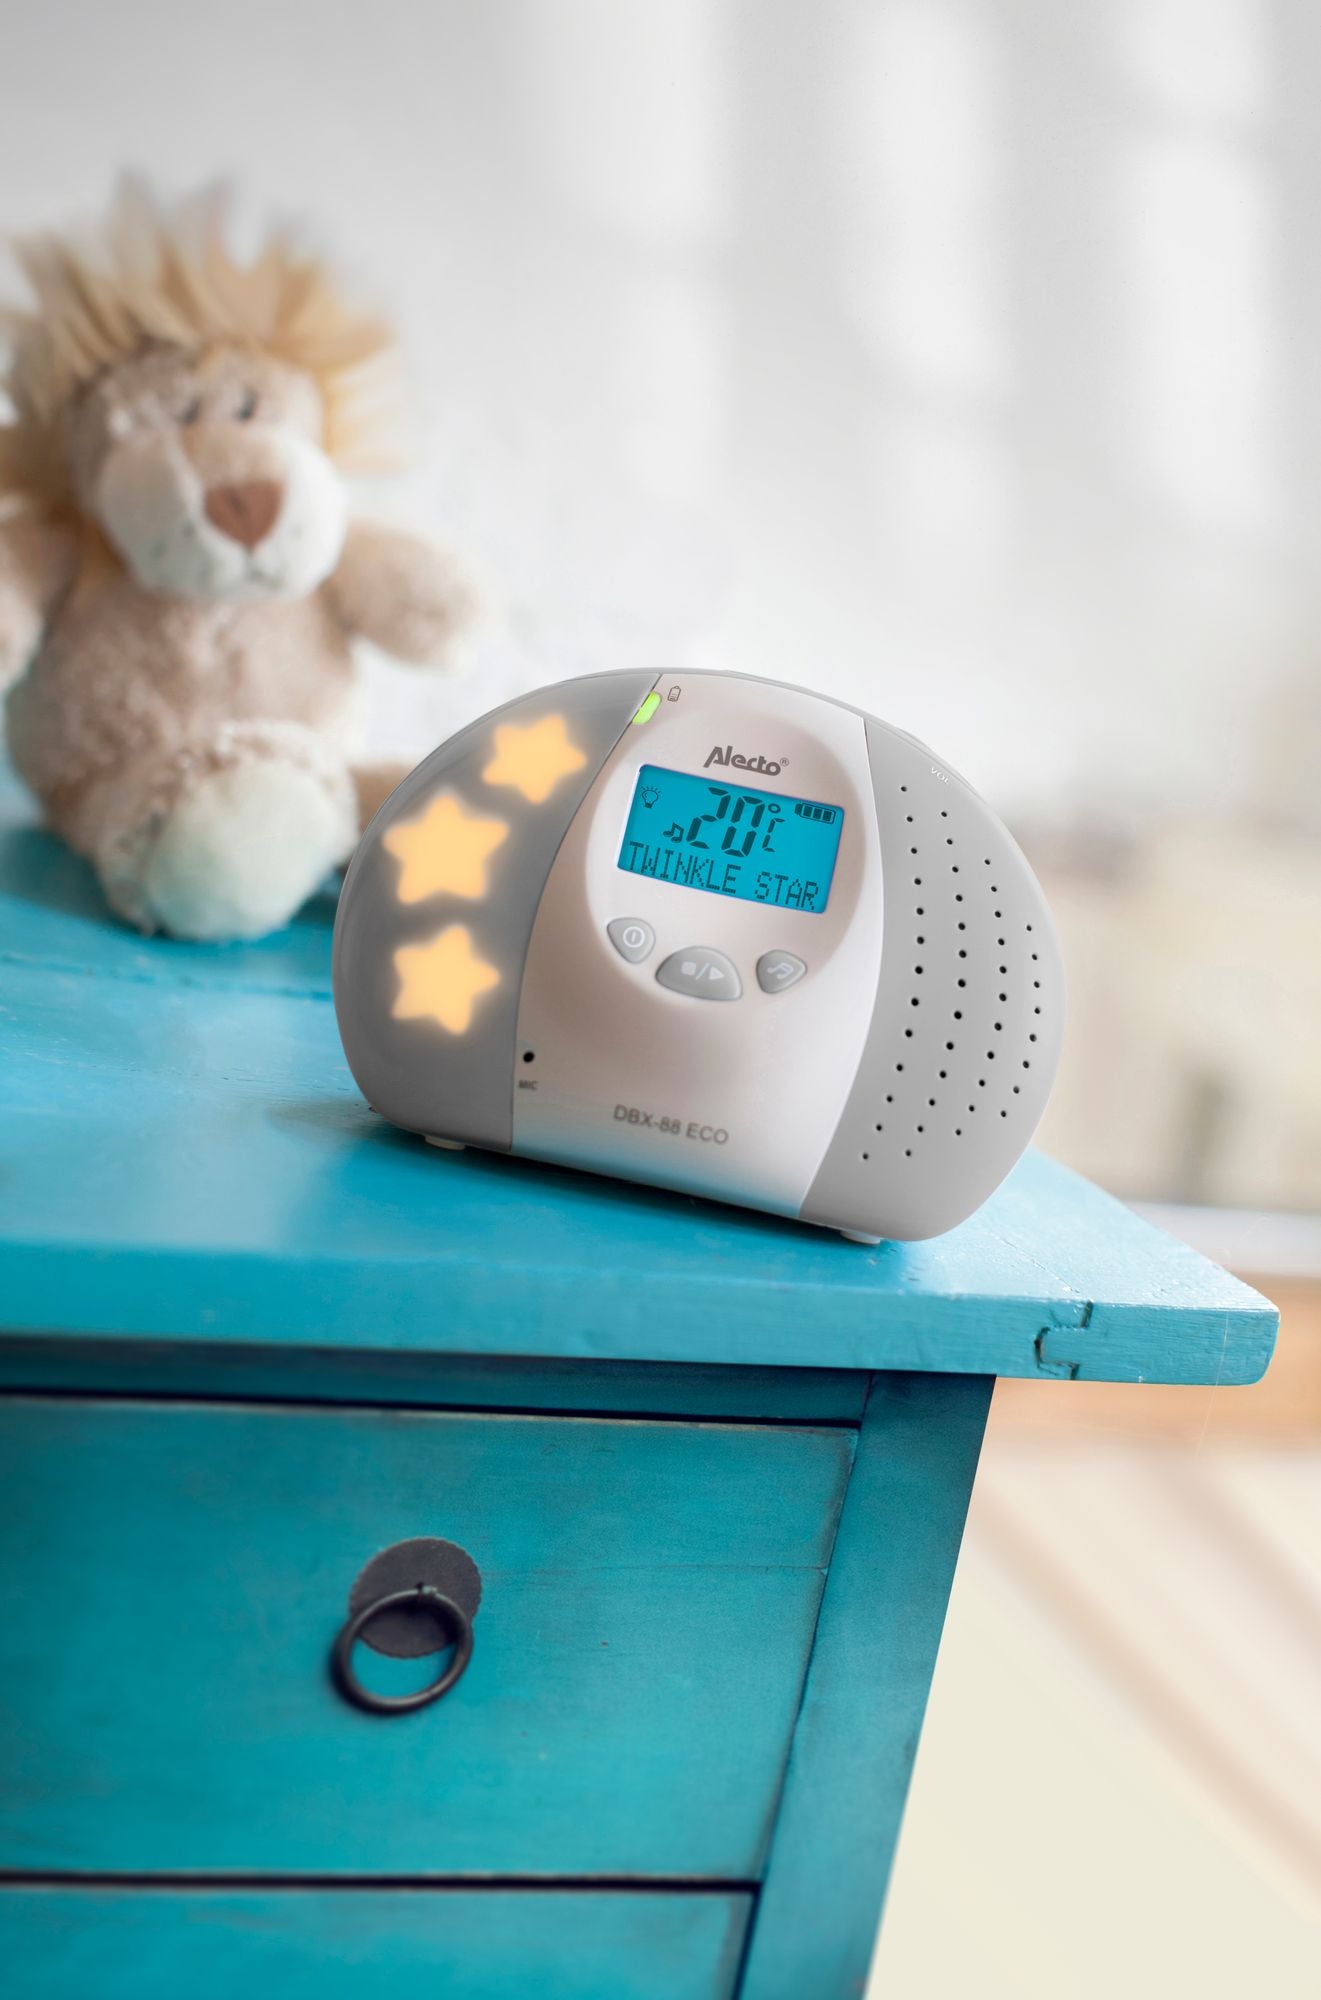 Alecto DBX-88GS - Full Eco DECT baby monitor with display, white/gray